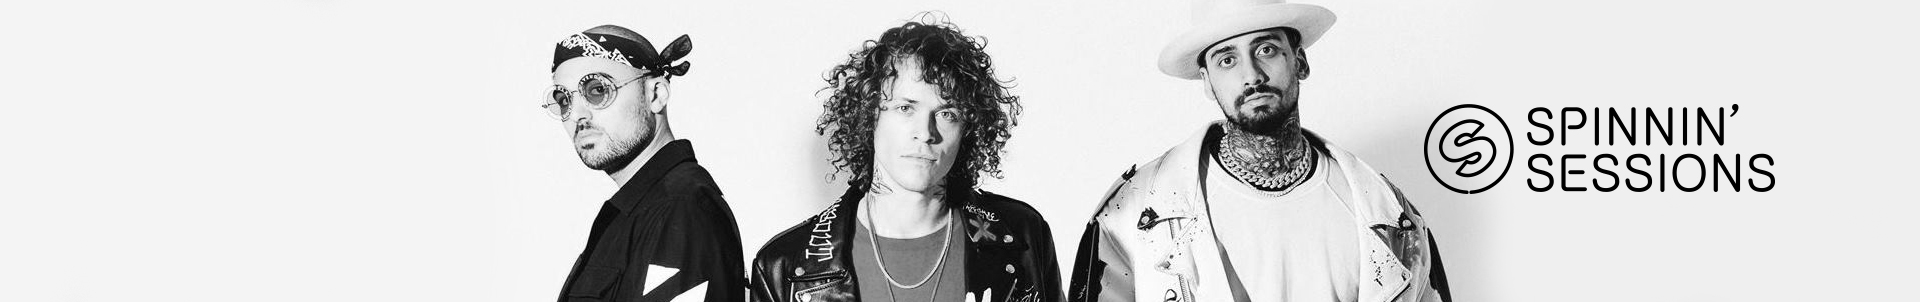 VIDEO: Cheat Codes presents 'Who's Got Your Love' videoclip!